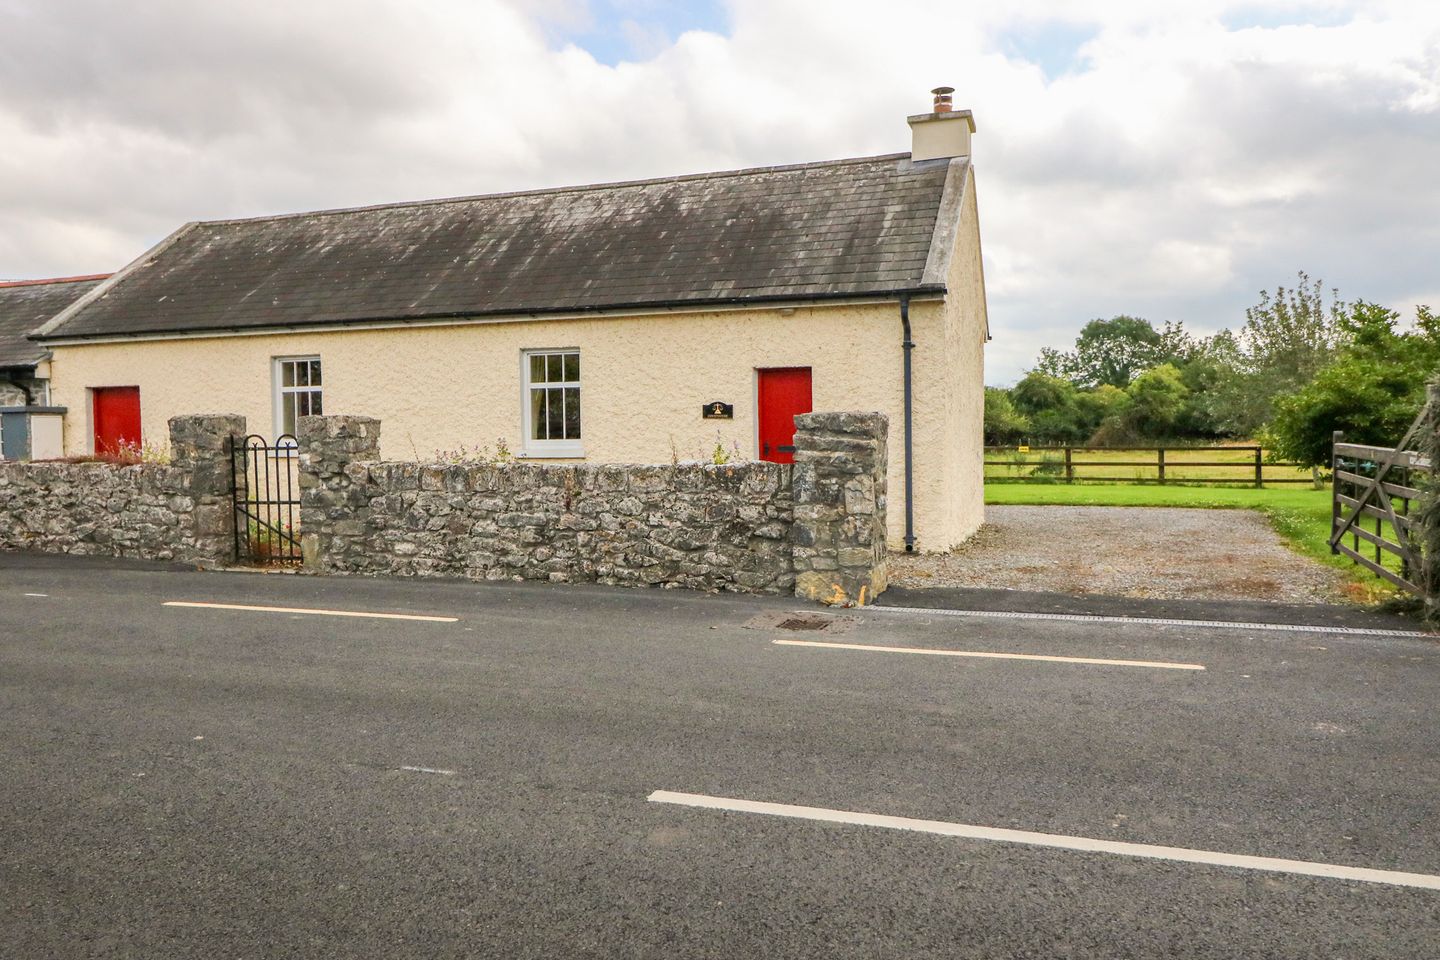 Ref. 1016499 Courthouse, Lorrha, Negagh, Tipperary Town, Co. Tipperary